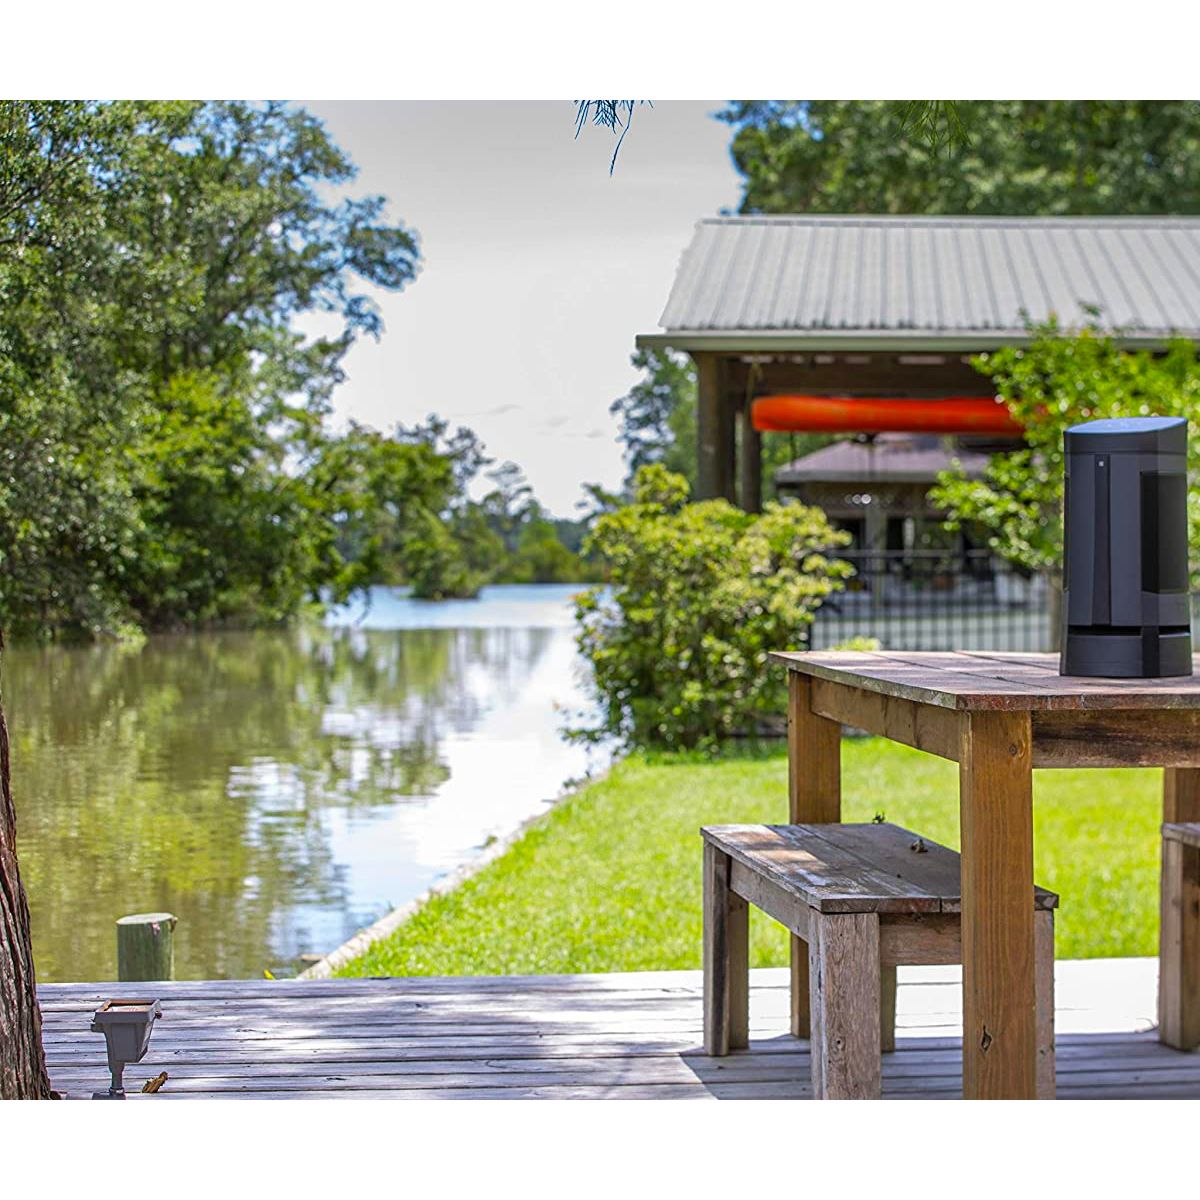 Wide-angle view of the SoundCast VG5 Bluetooth Loudspeaker on a picnic table next to a boat dock at a lake house.